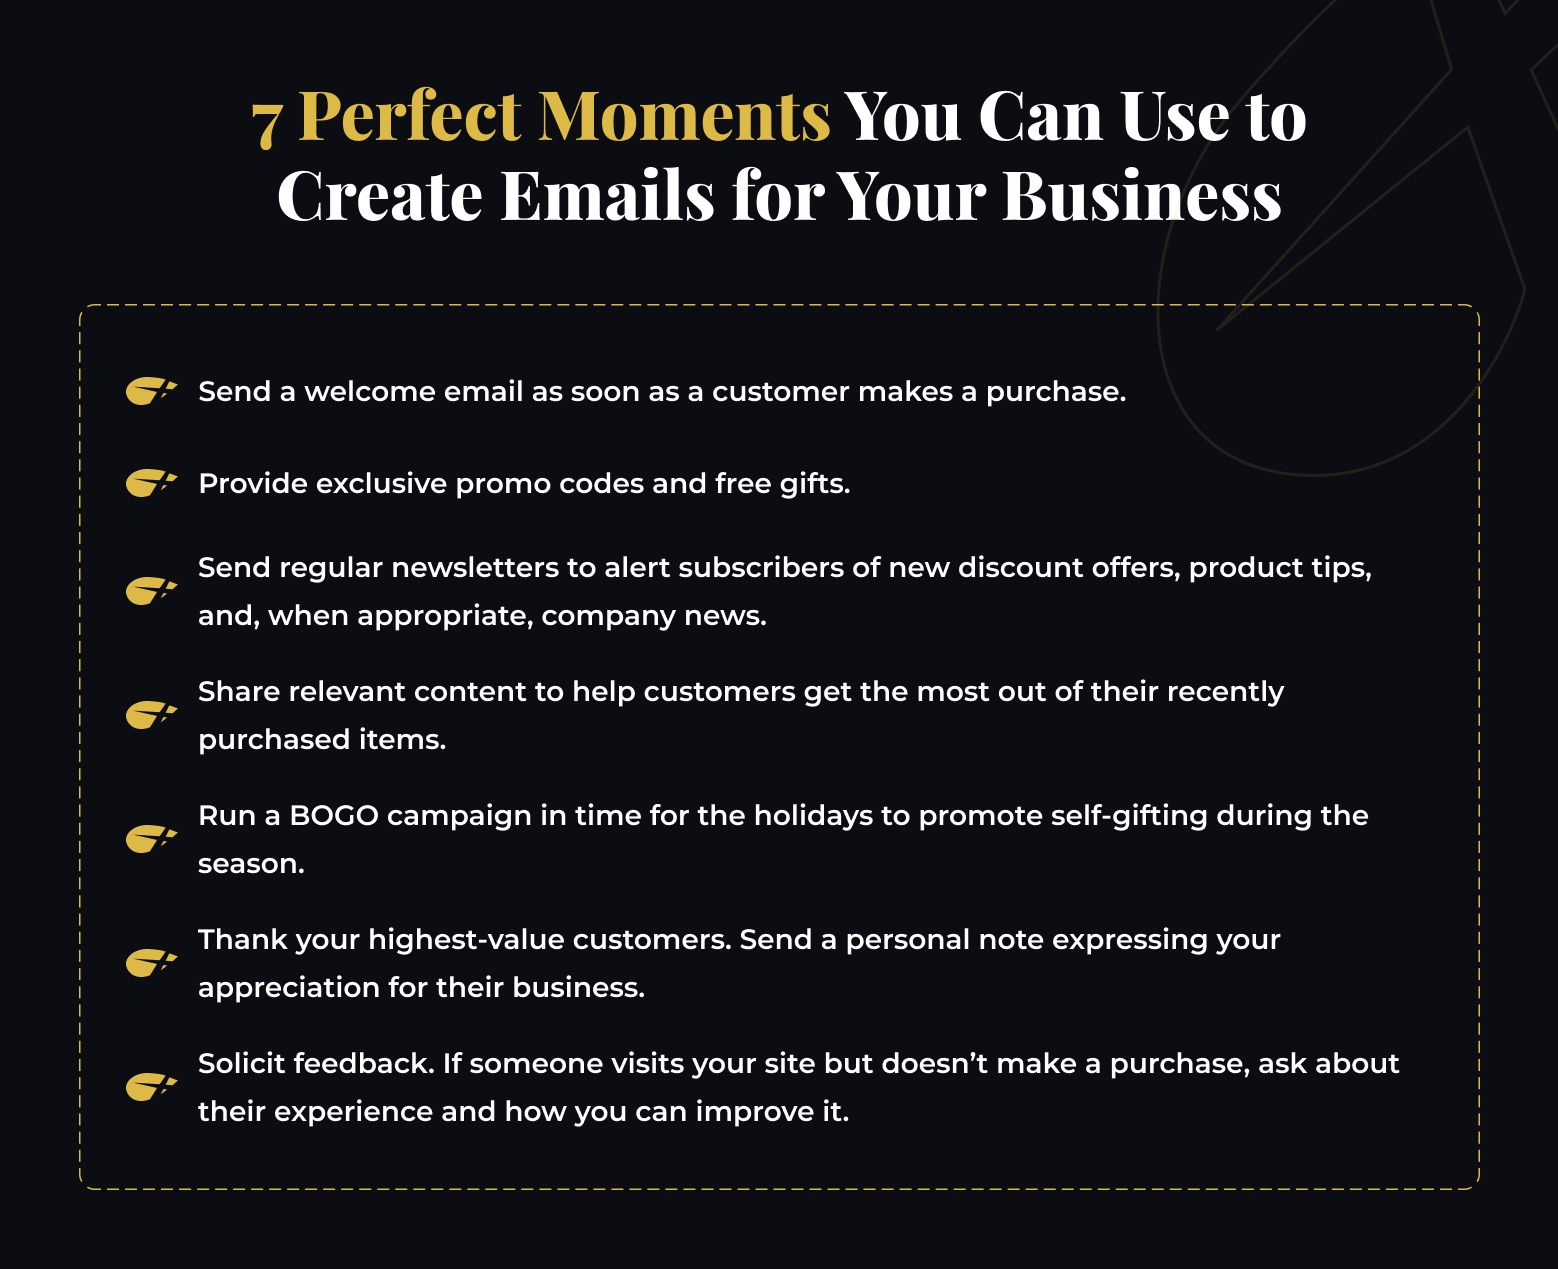 7 Perfect Moments You Can Use to Create Emails for Your Business